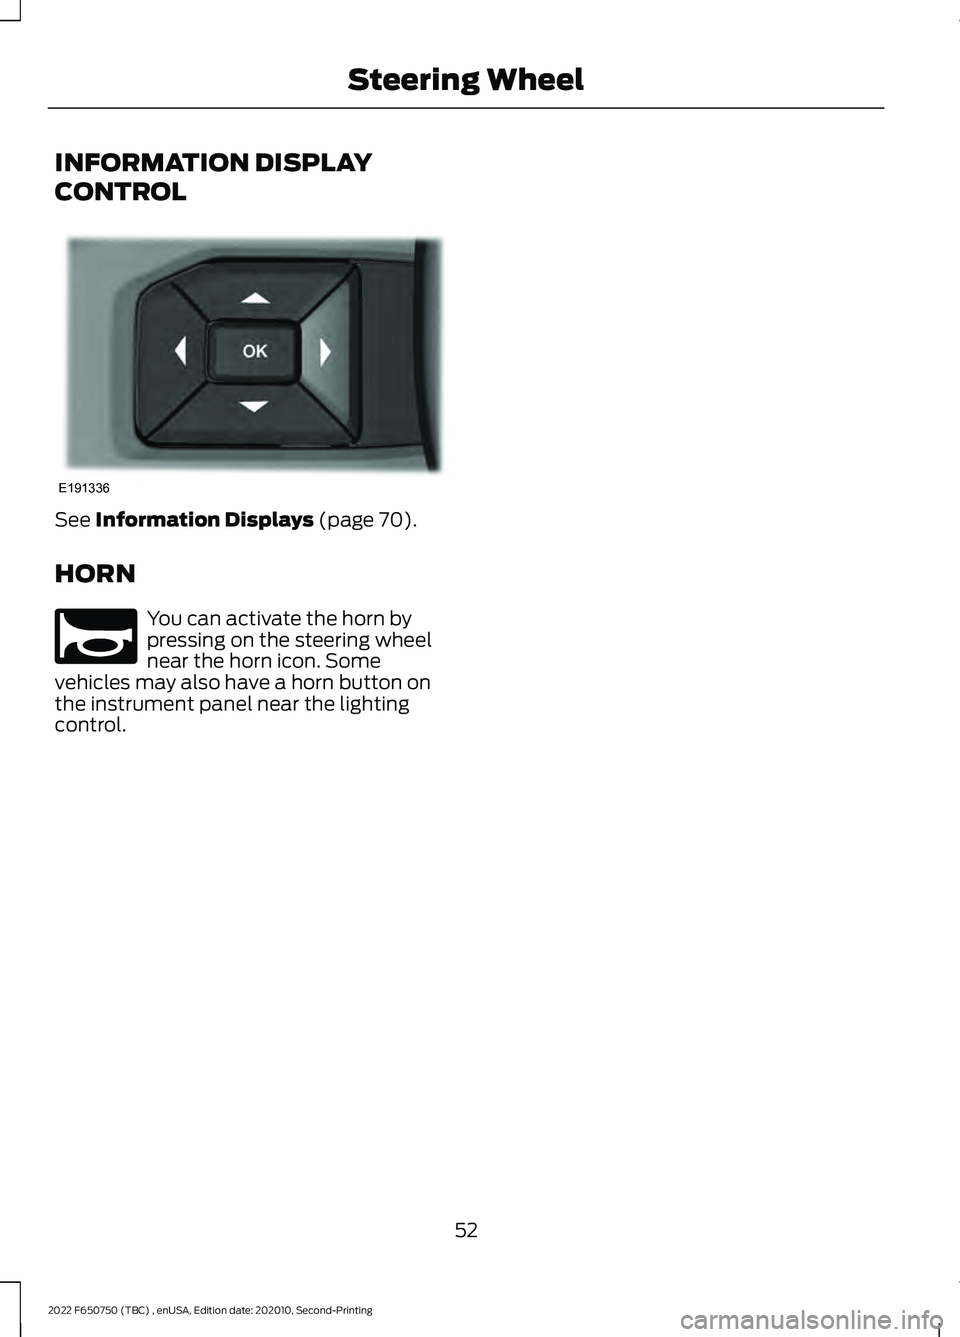 FORD F-650/750 2022  Owners Manual INFORMATION DISPLAY
CONTROL
See Information Displays (page 70).
HORN You can activate the horn by
pressing on the steering wheel
near the horn icon. Some
vehicles may also have a horn button on
the in